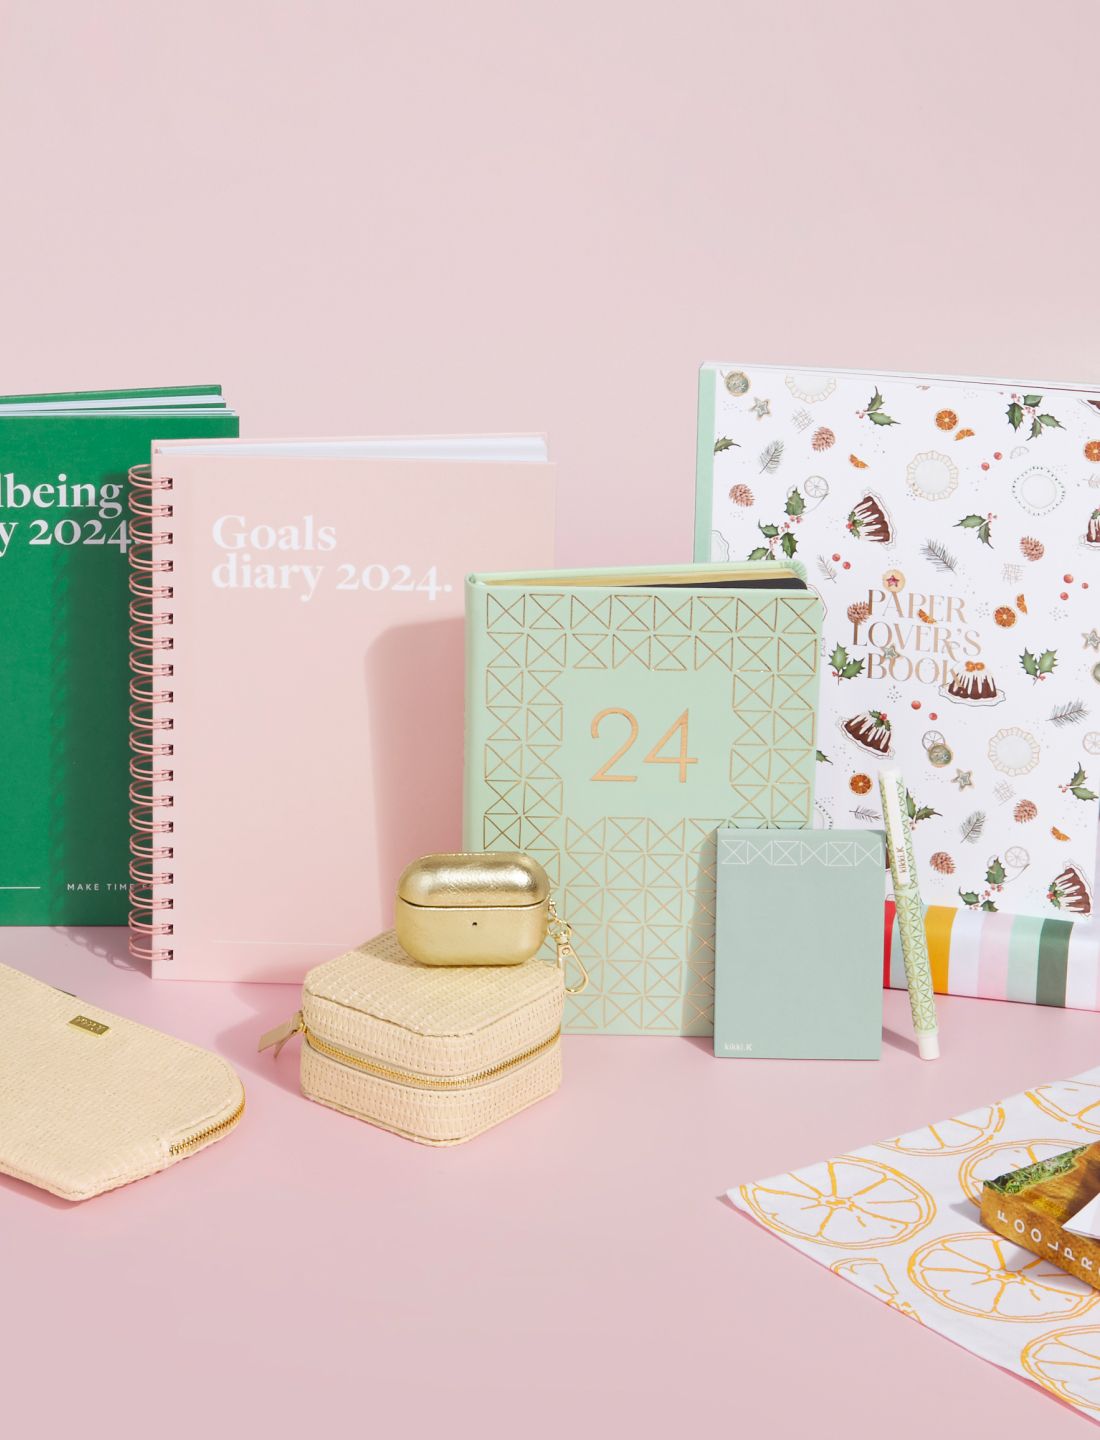 A collection of Diaries, Calendars and Stationary Accessories